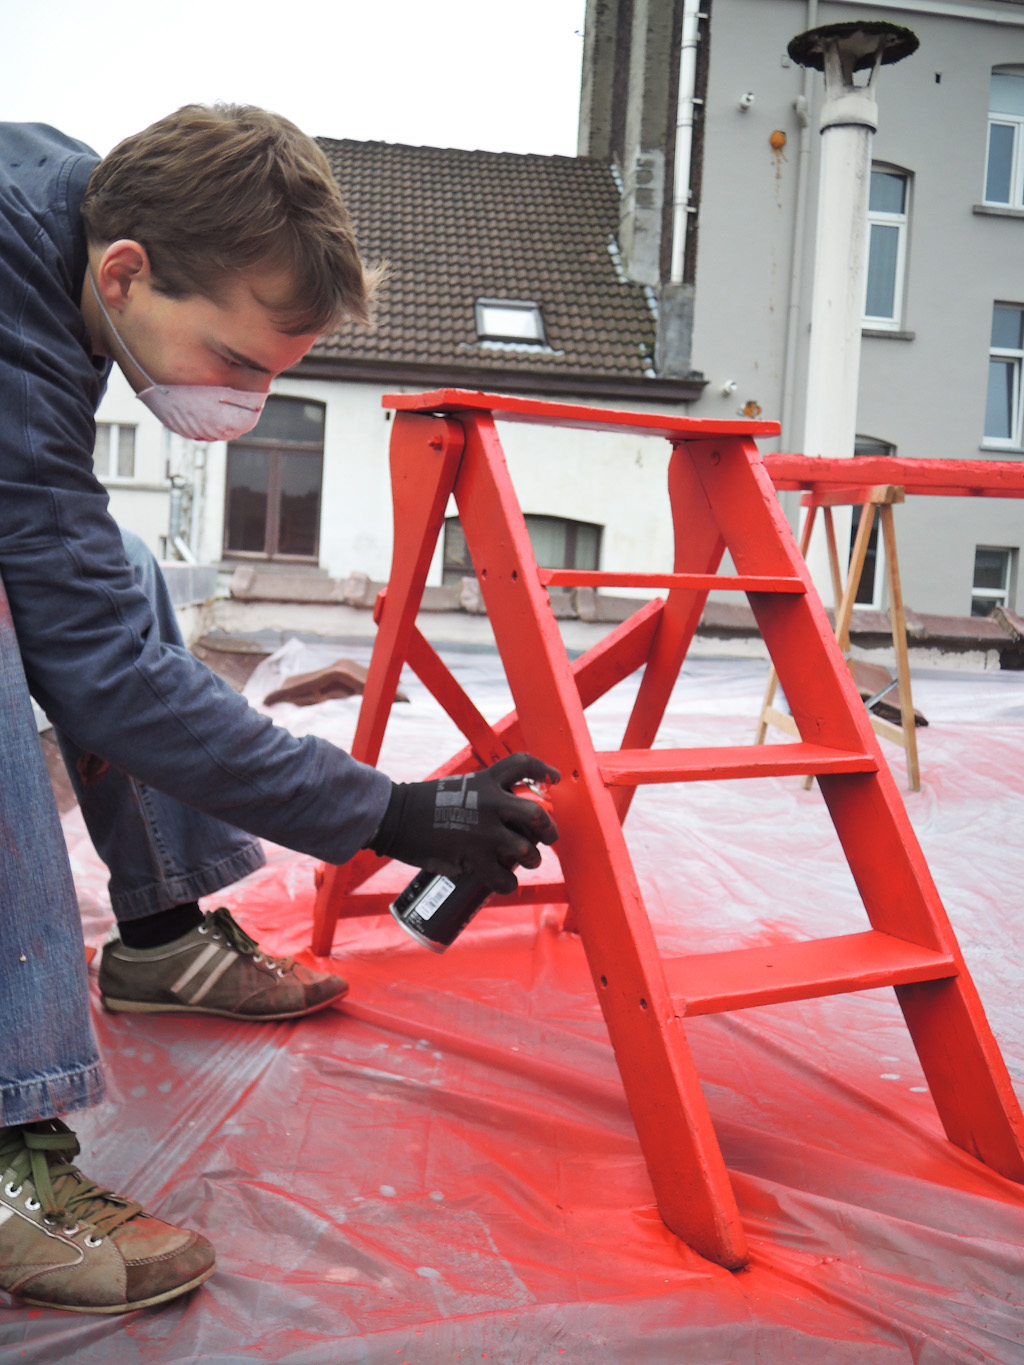 ladders ladder red logo view POINT OF VIEW identity Association youth paint assembly wall Entrance welcome scale